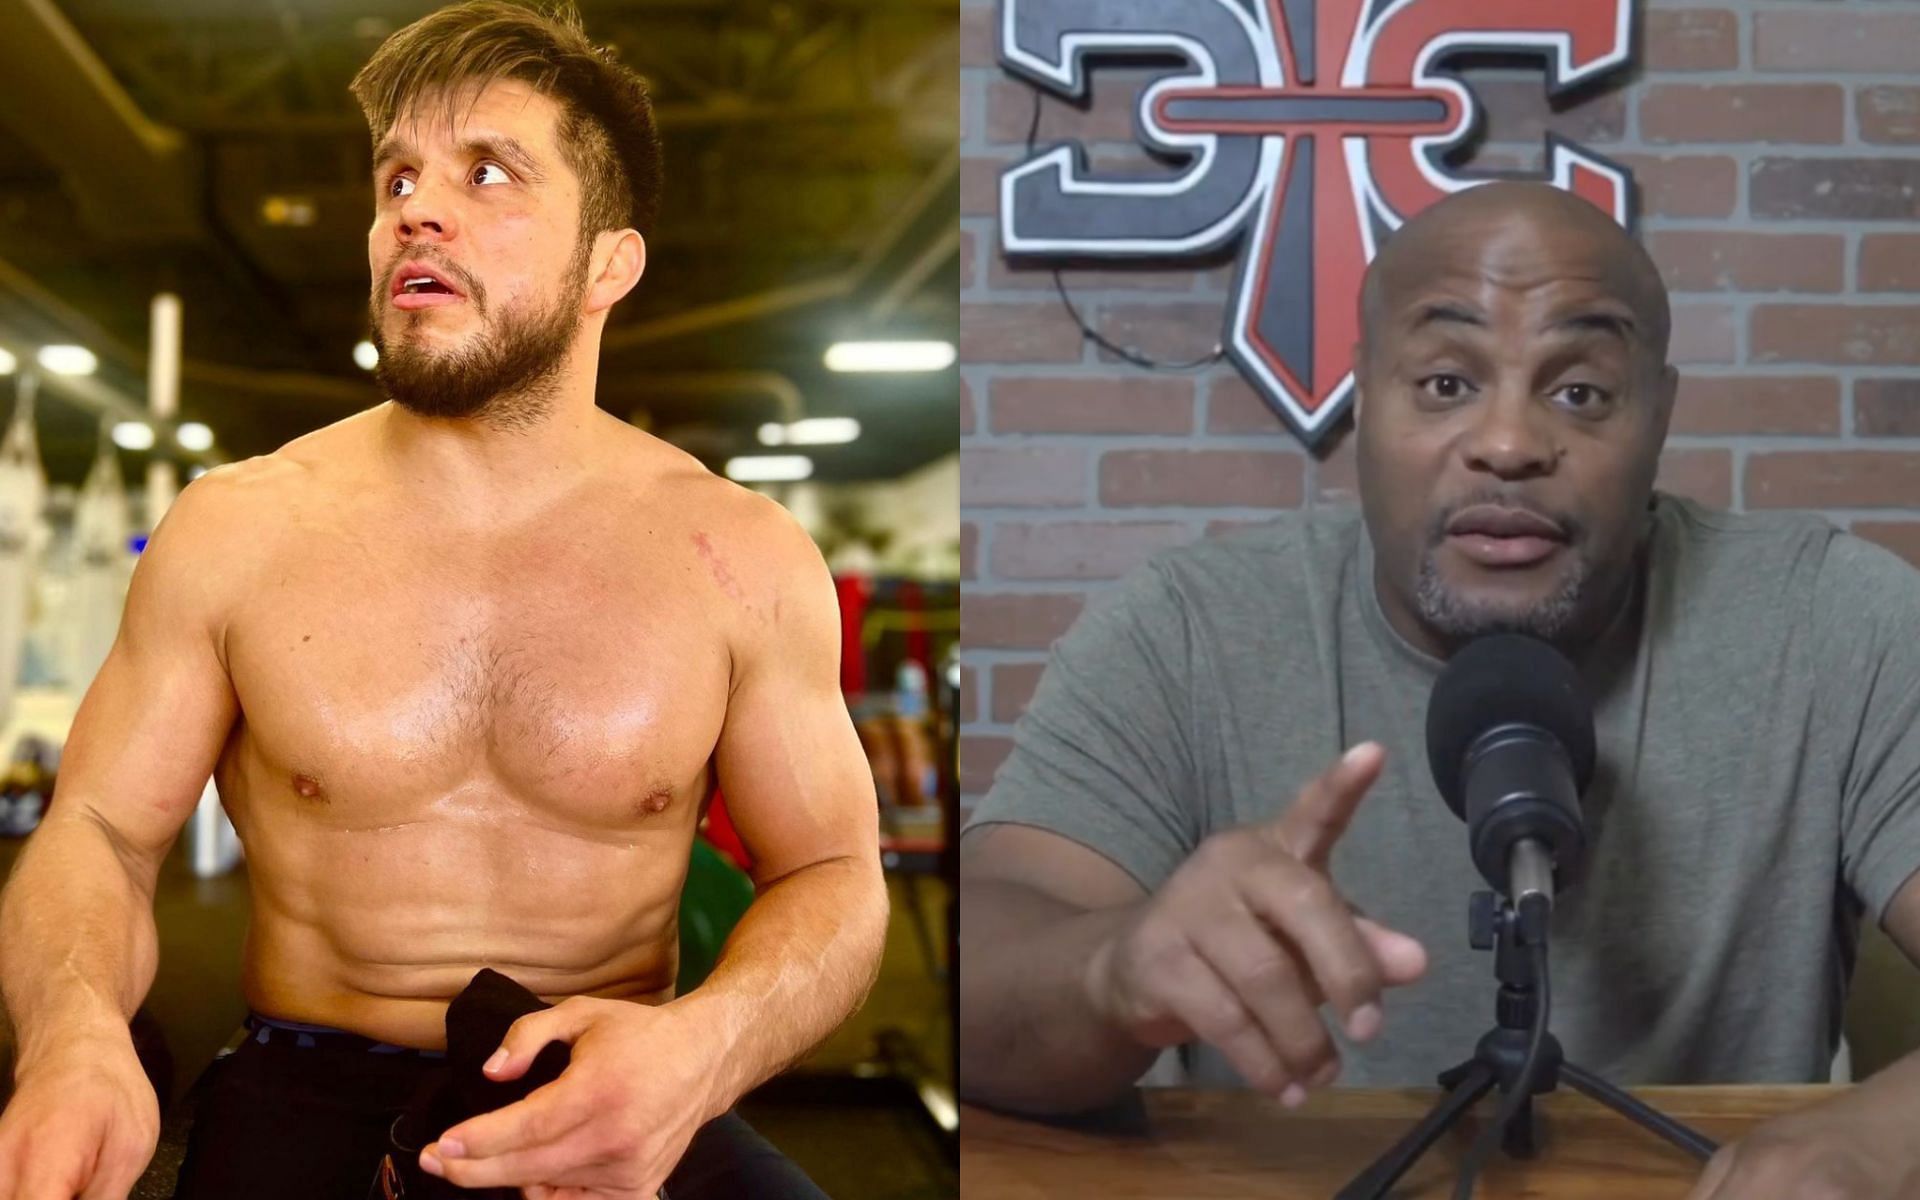 Henry Cejudo (left) and Daniel Cormier (right) [Photo Courtesy @henry_cejudo and @dc_mma on Instagram]